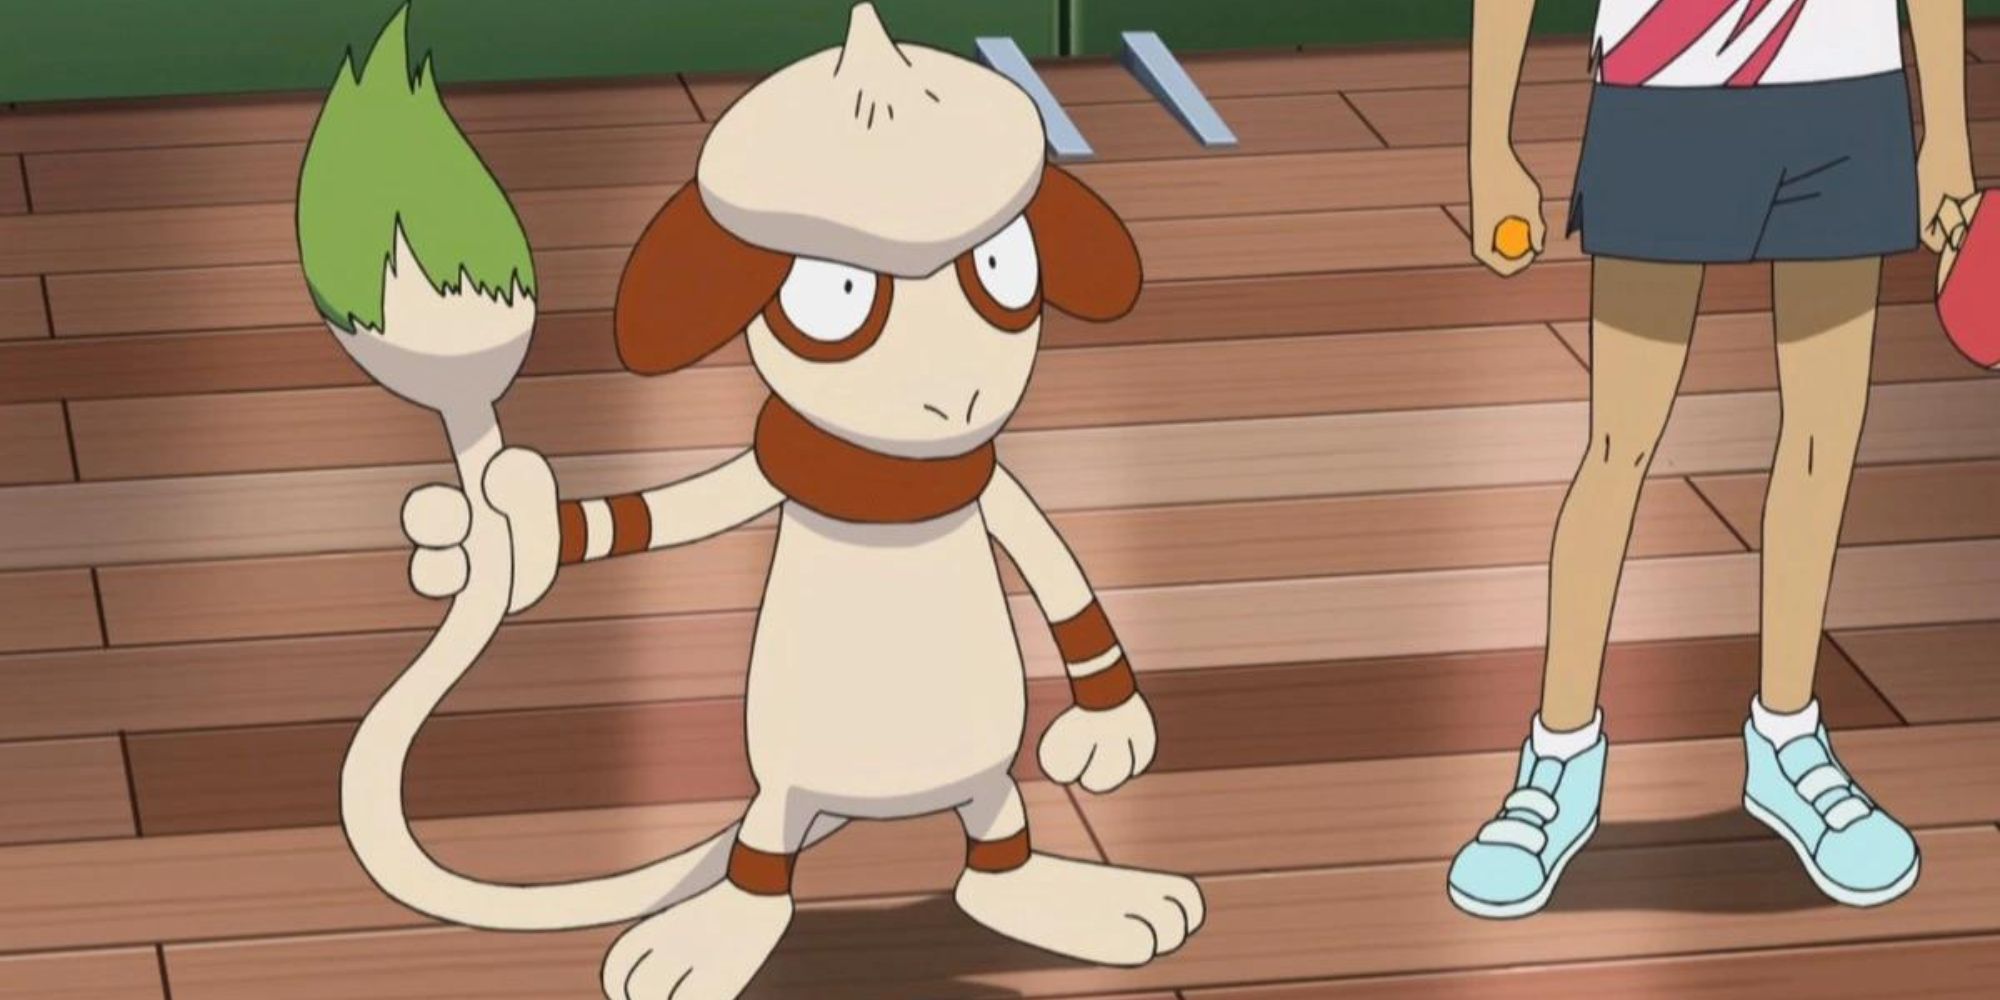 A Smeargle holds its tail beside a trainer holding a ping pong ball and paddle